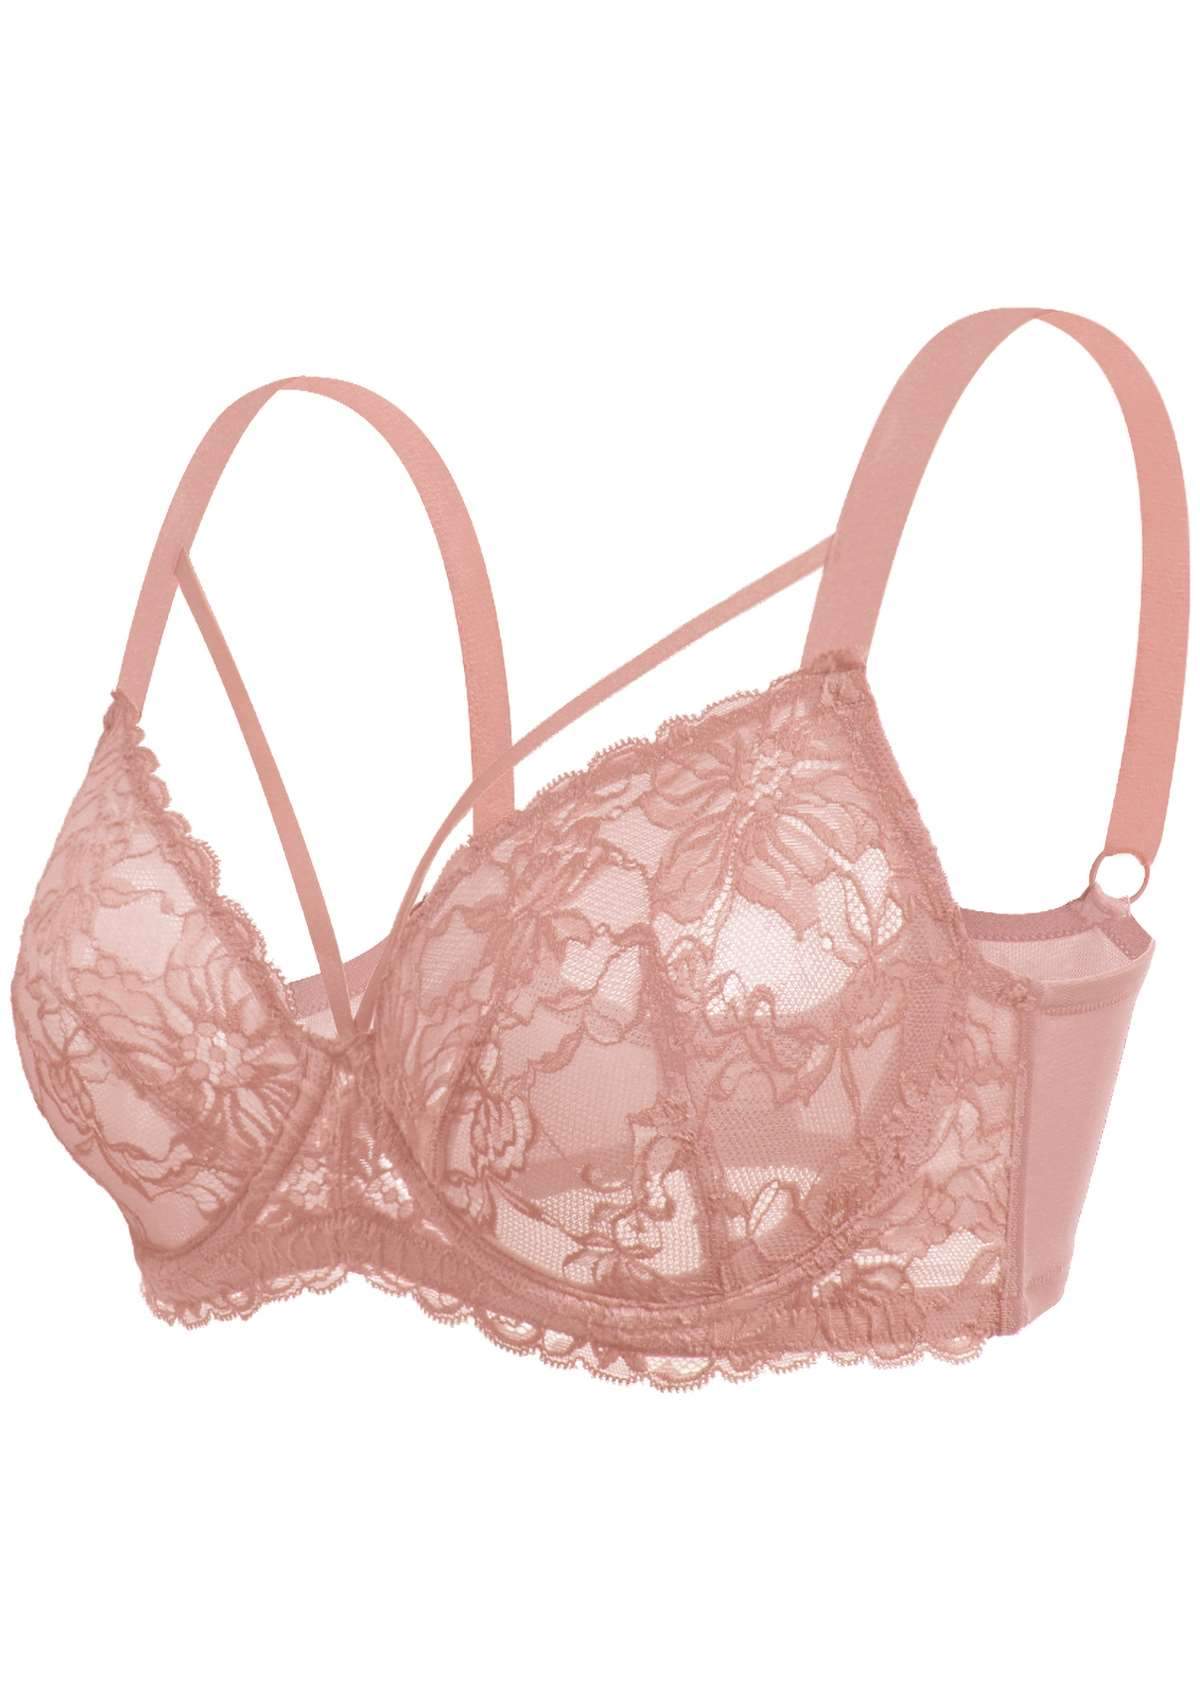 HSIA Pretty In Petals Lace Bra And Panty Sets: Bra For Big Boobs - Light Coral / 34 / DDD/F